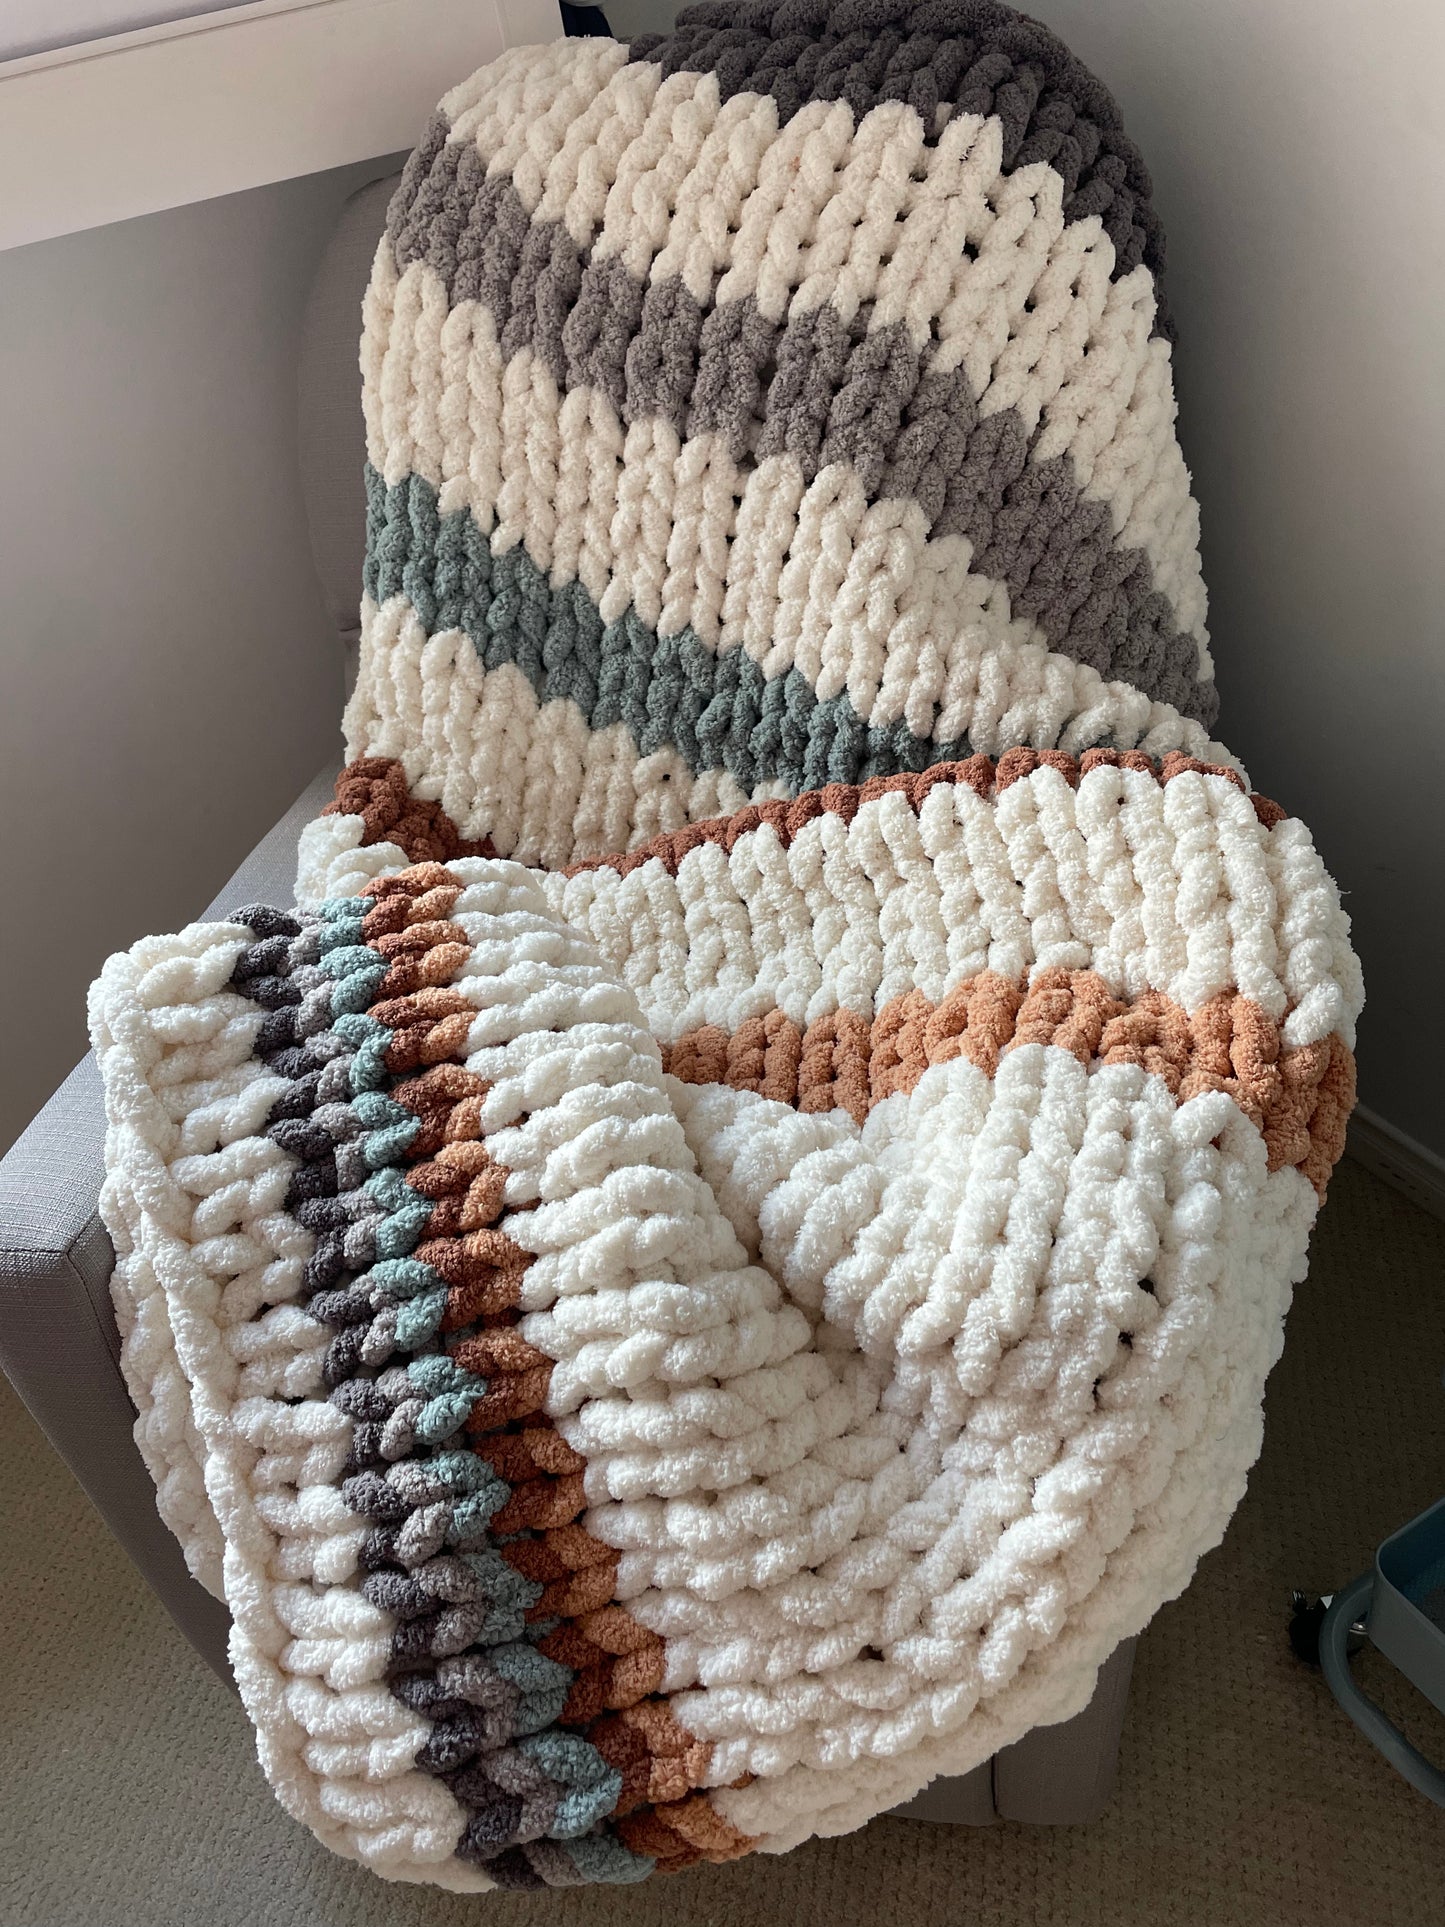 Healing Hand, Chunky Knit "The Vermont" Blanket